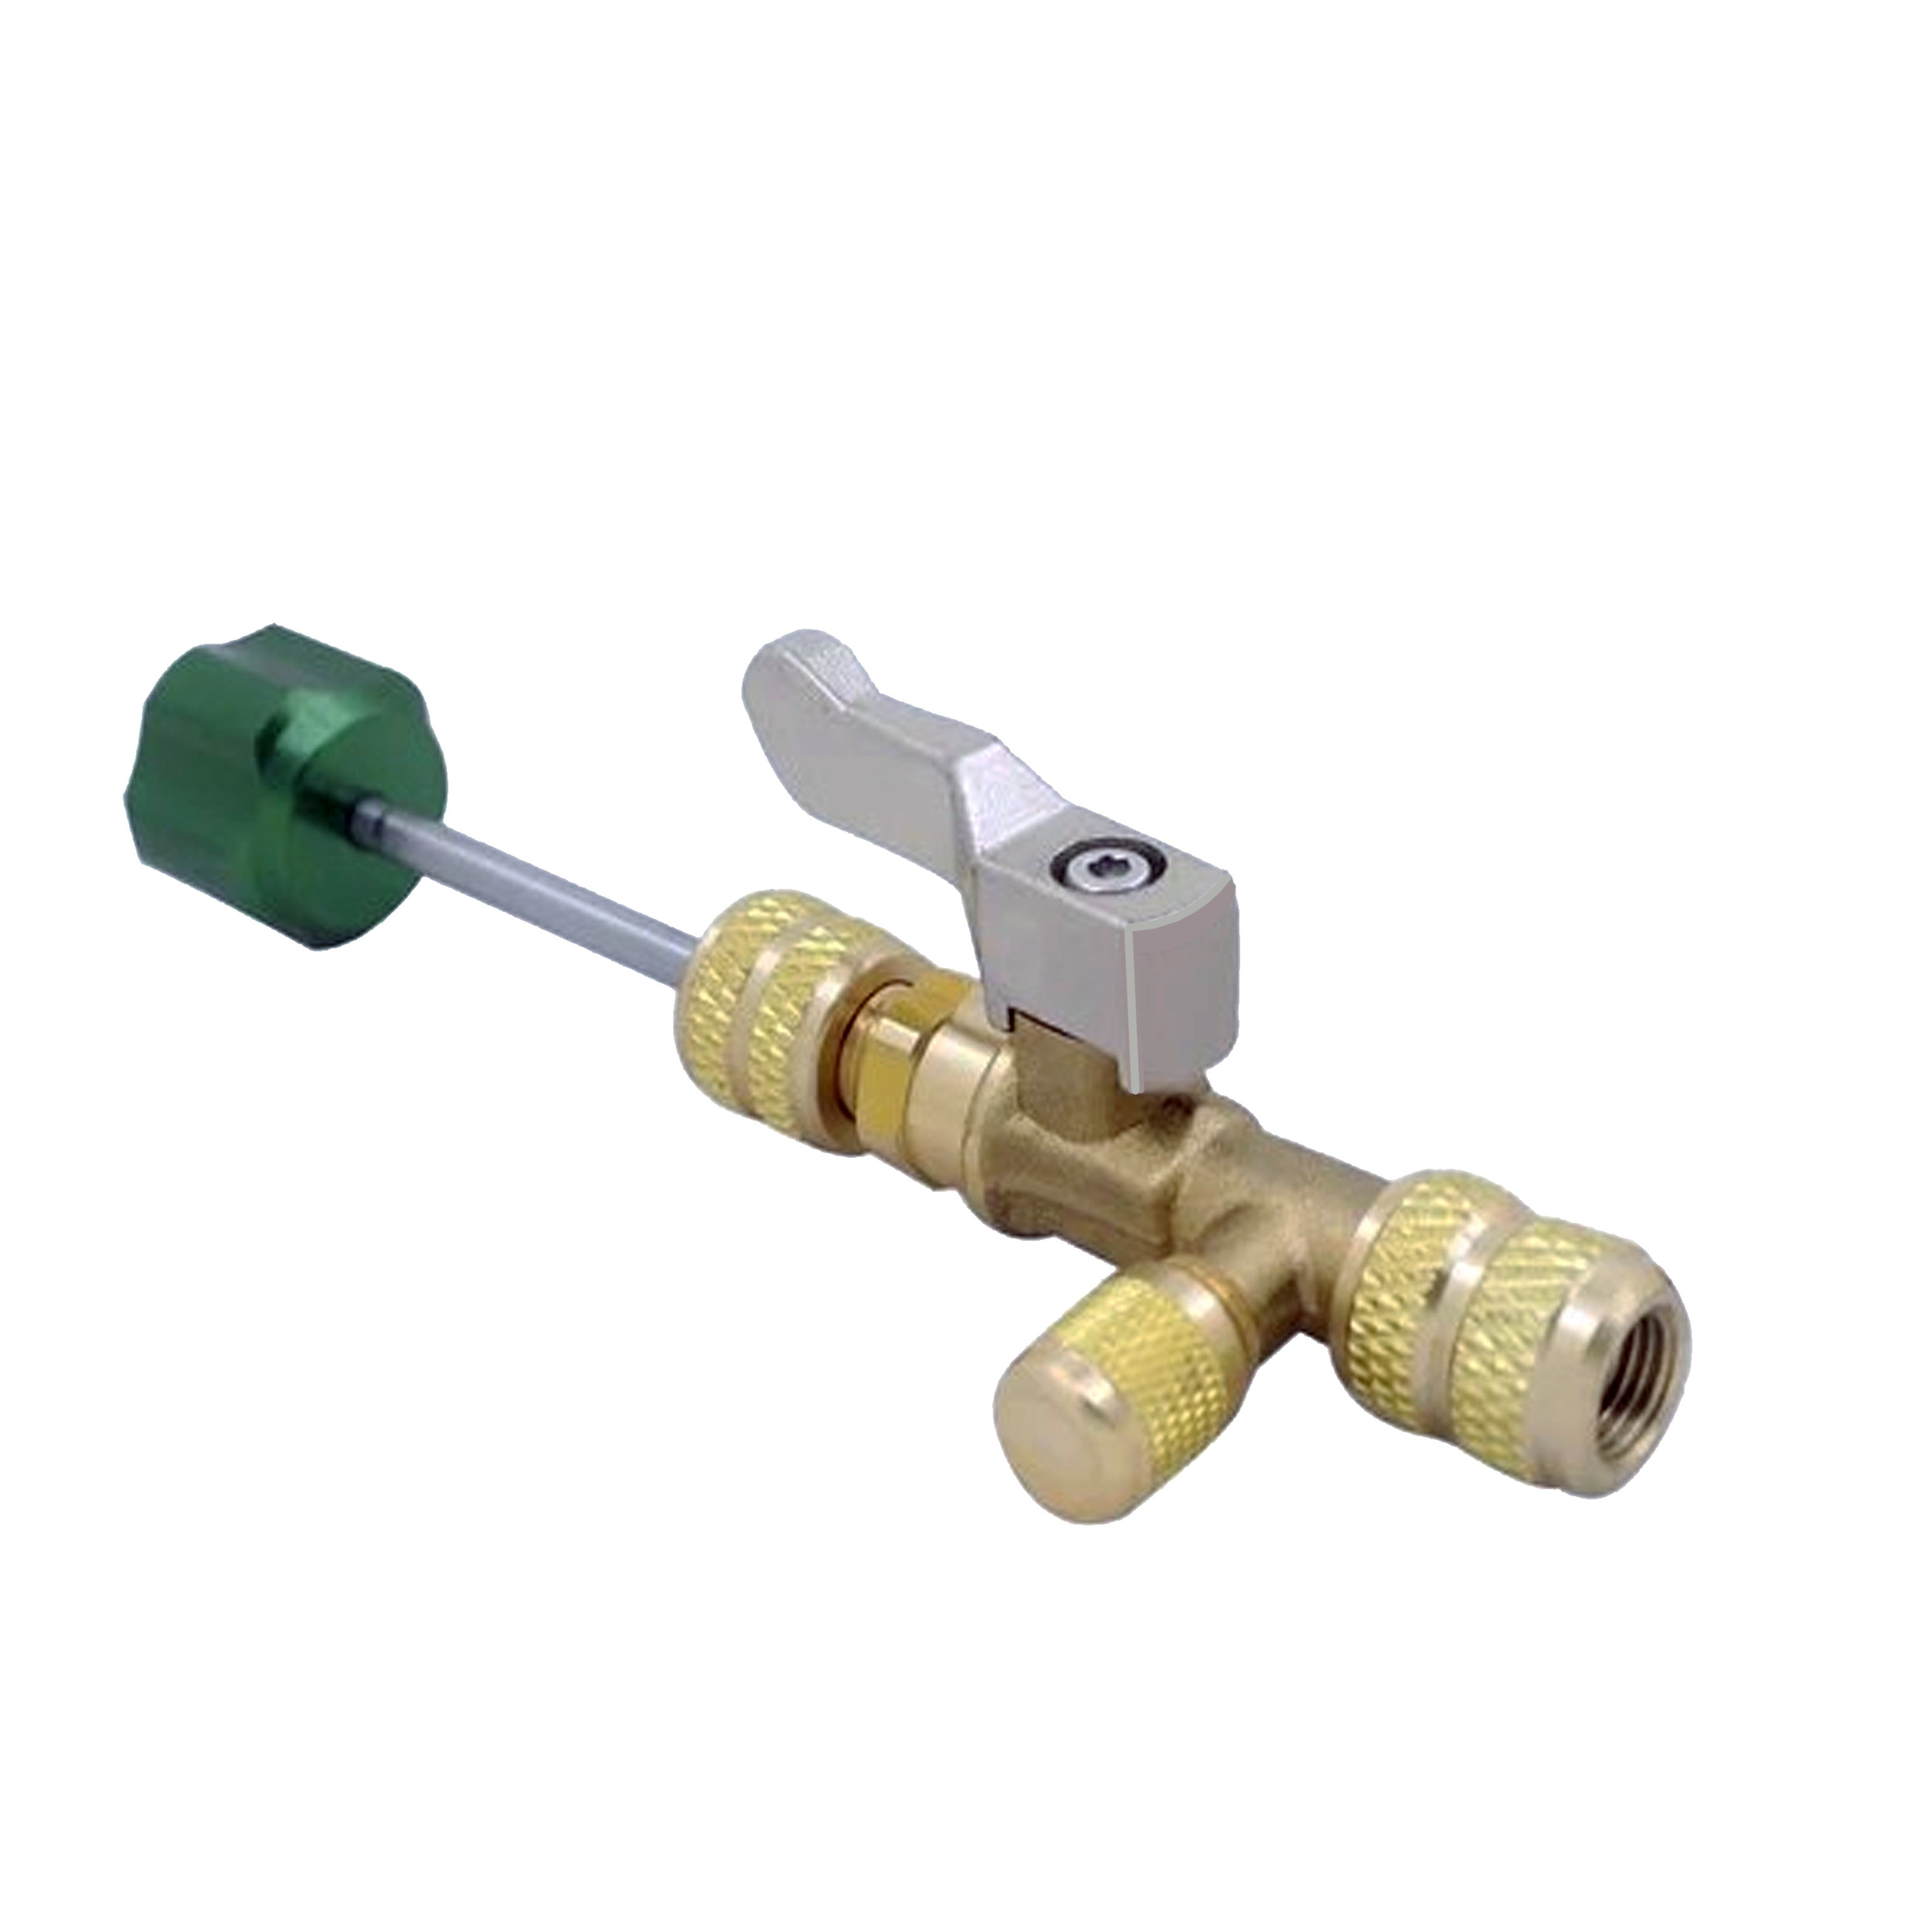 Core Valve Removal Tool for VacMaxx Kit